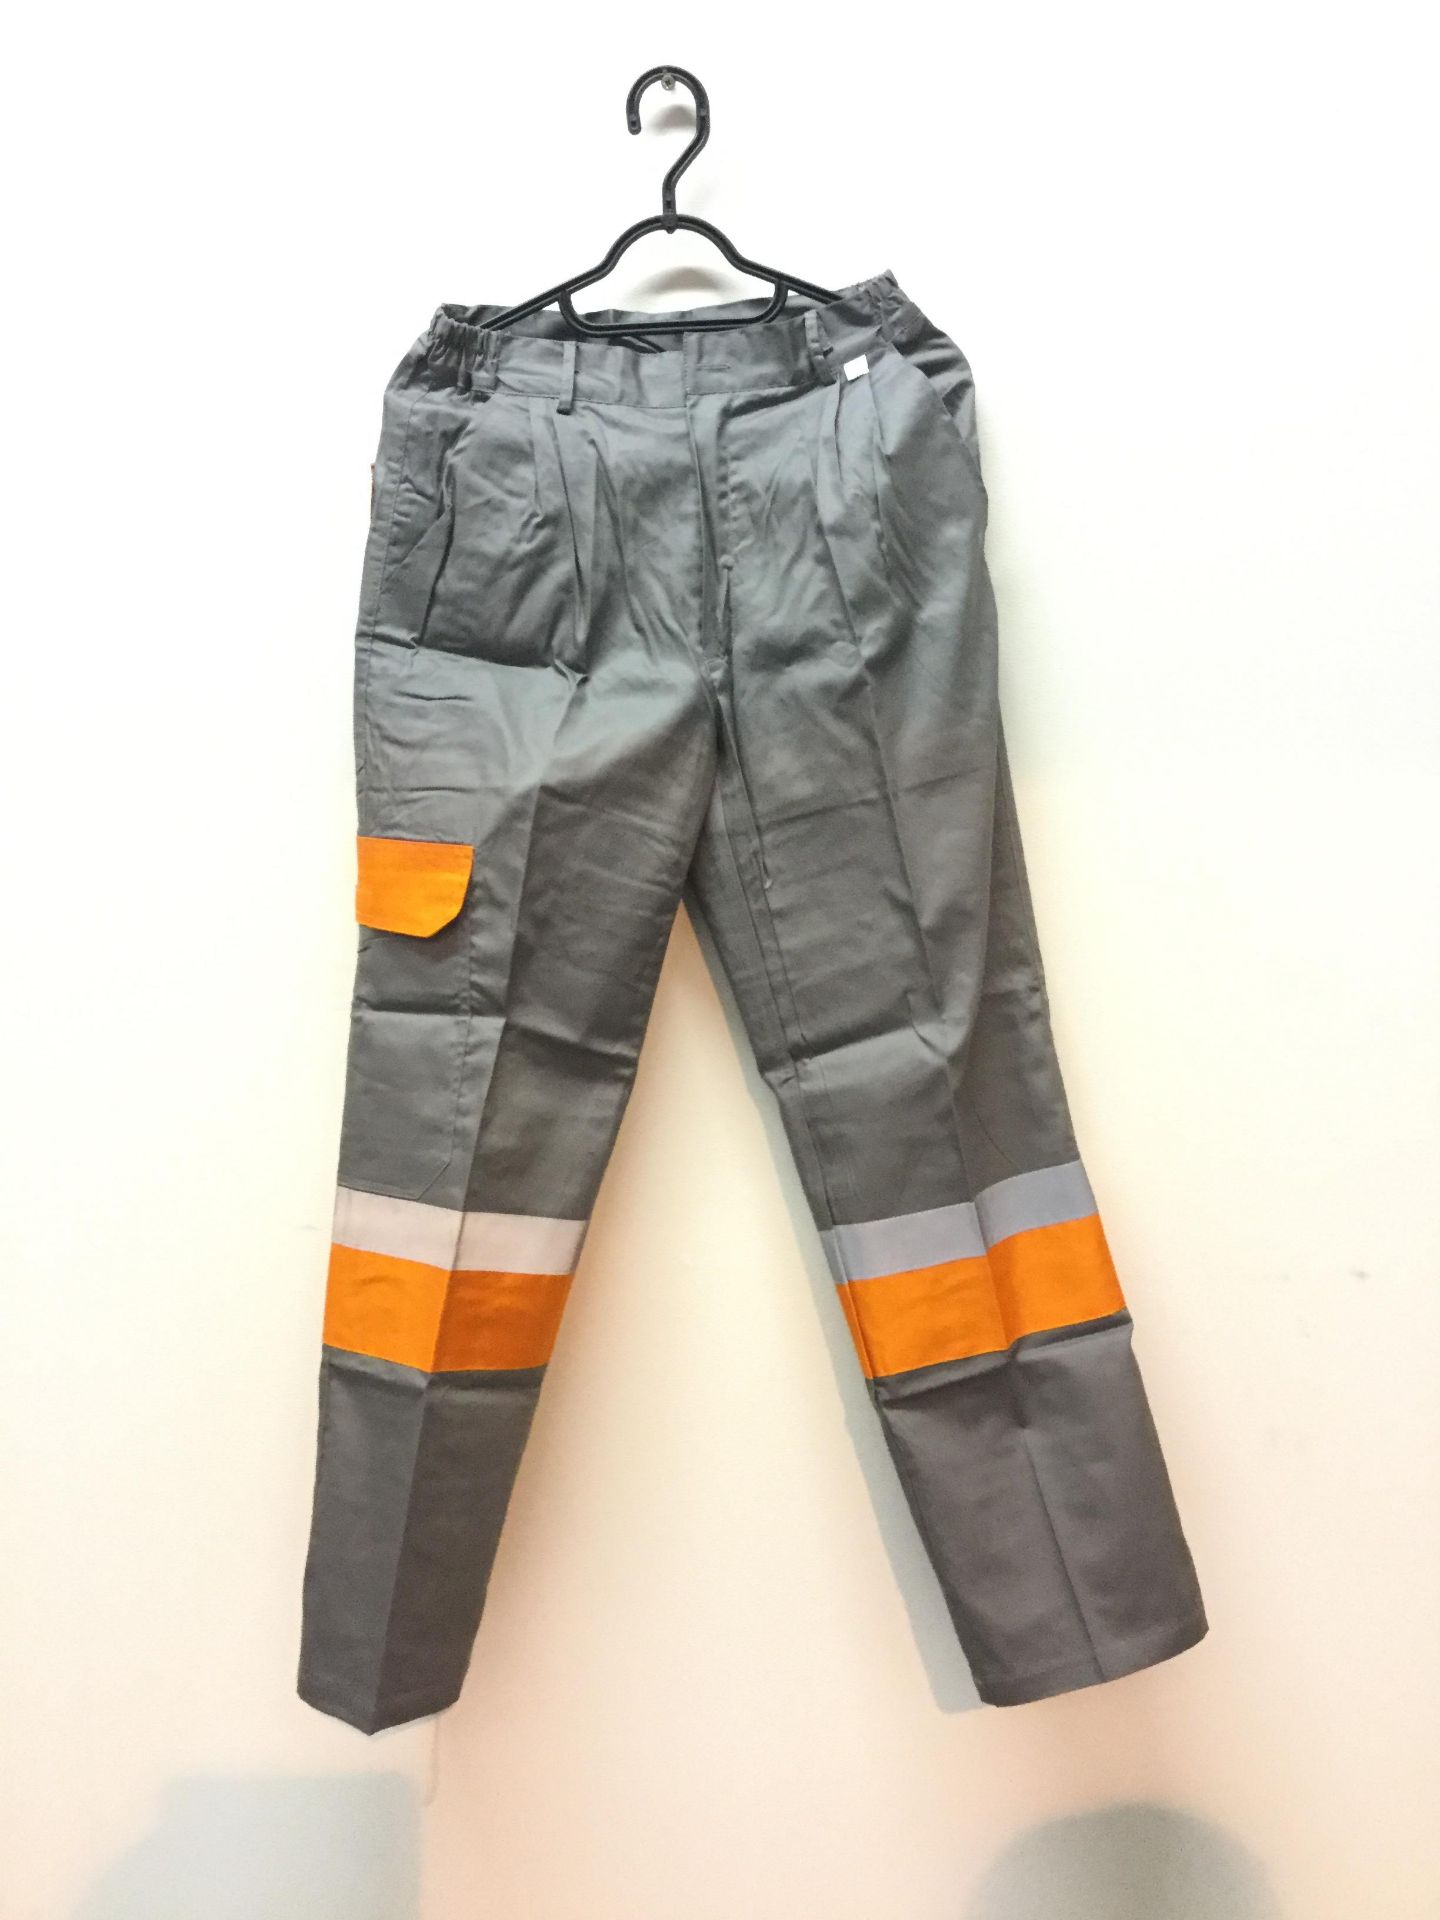 Flame Retardant Summer Trousers - Size 48